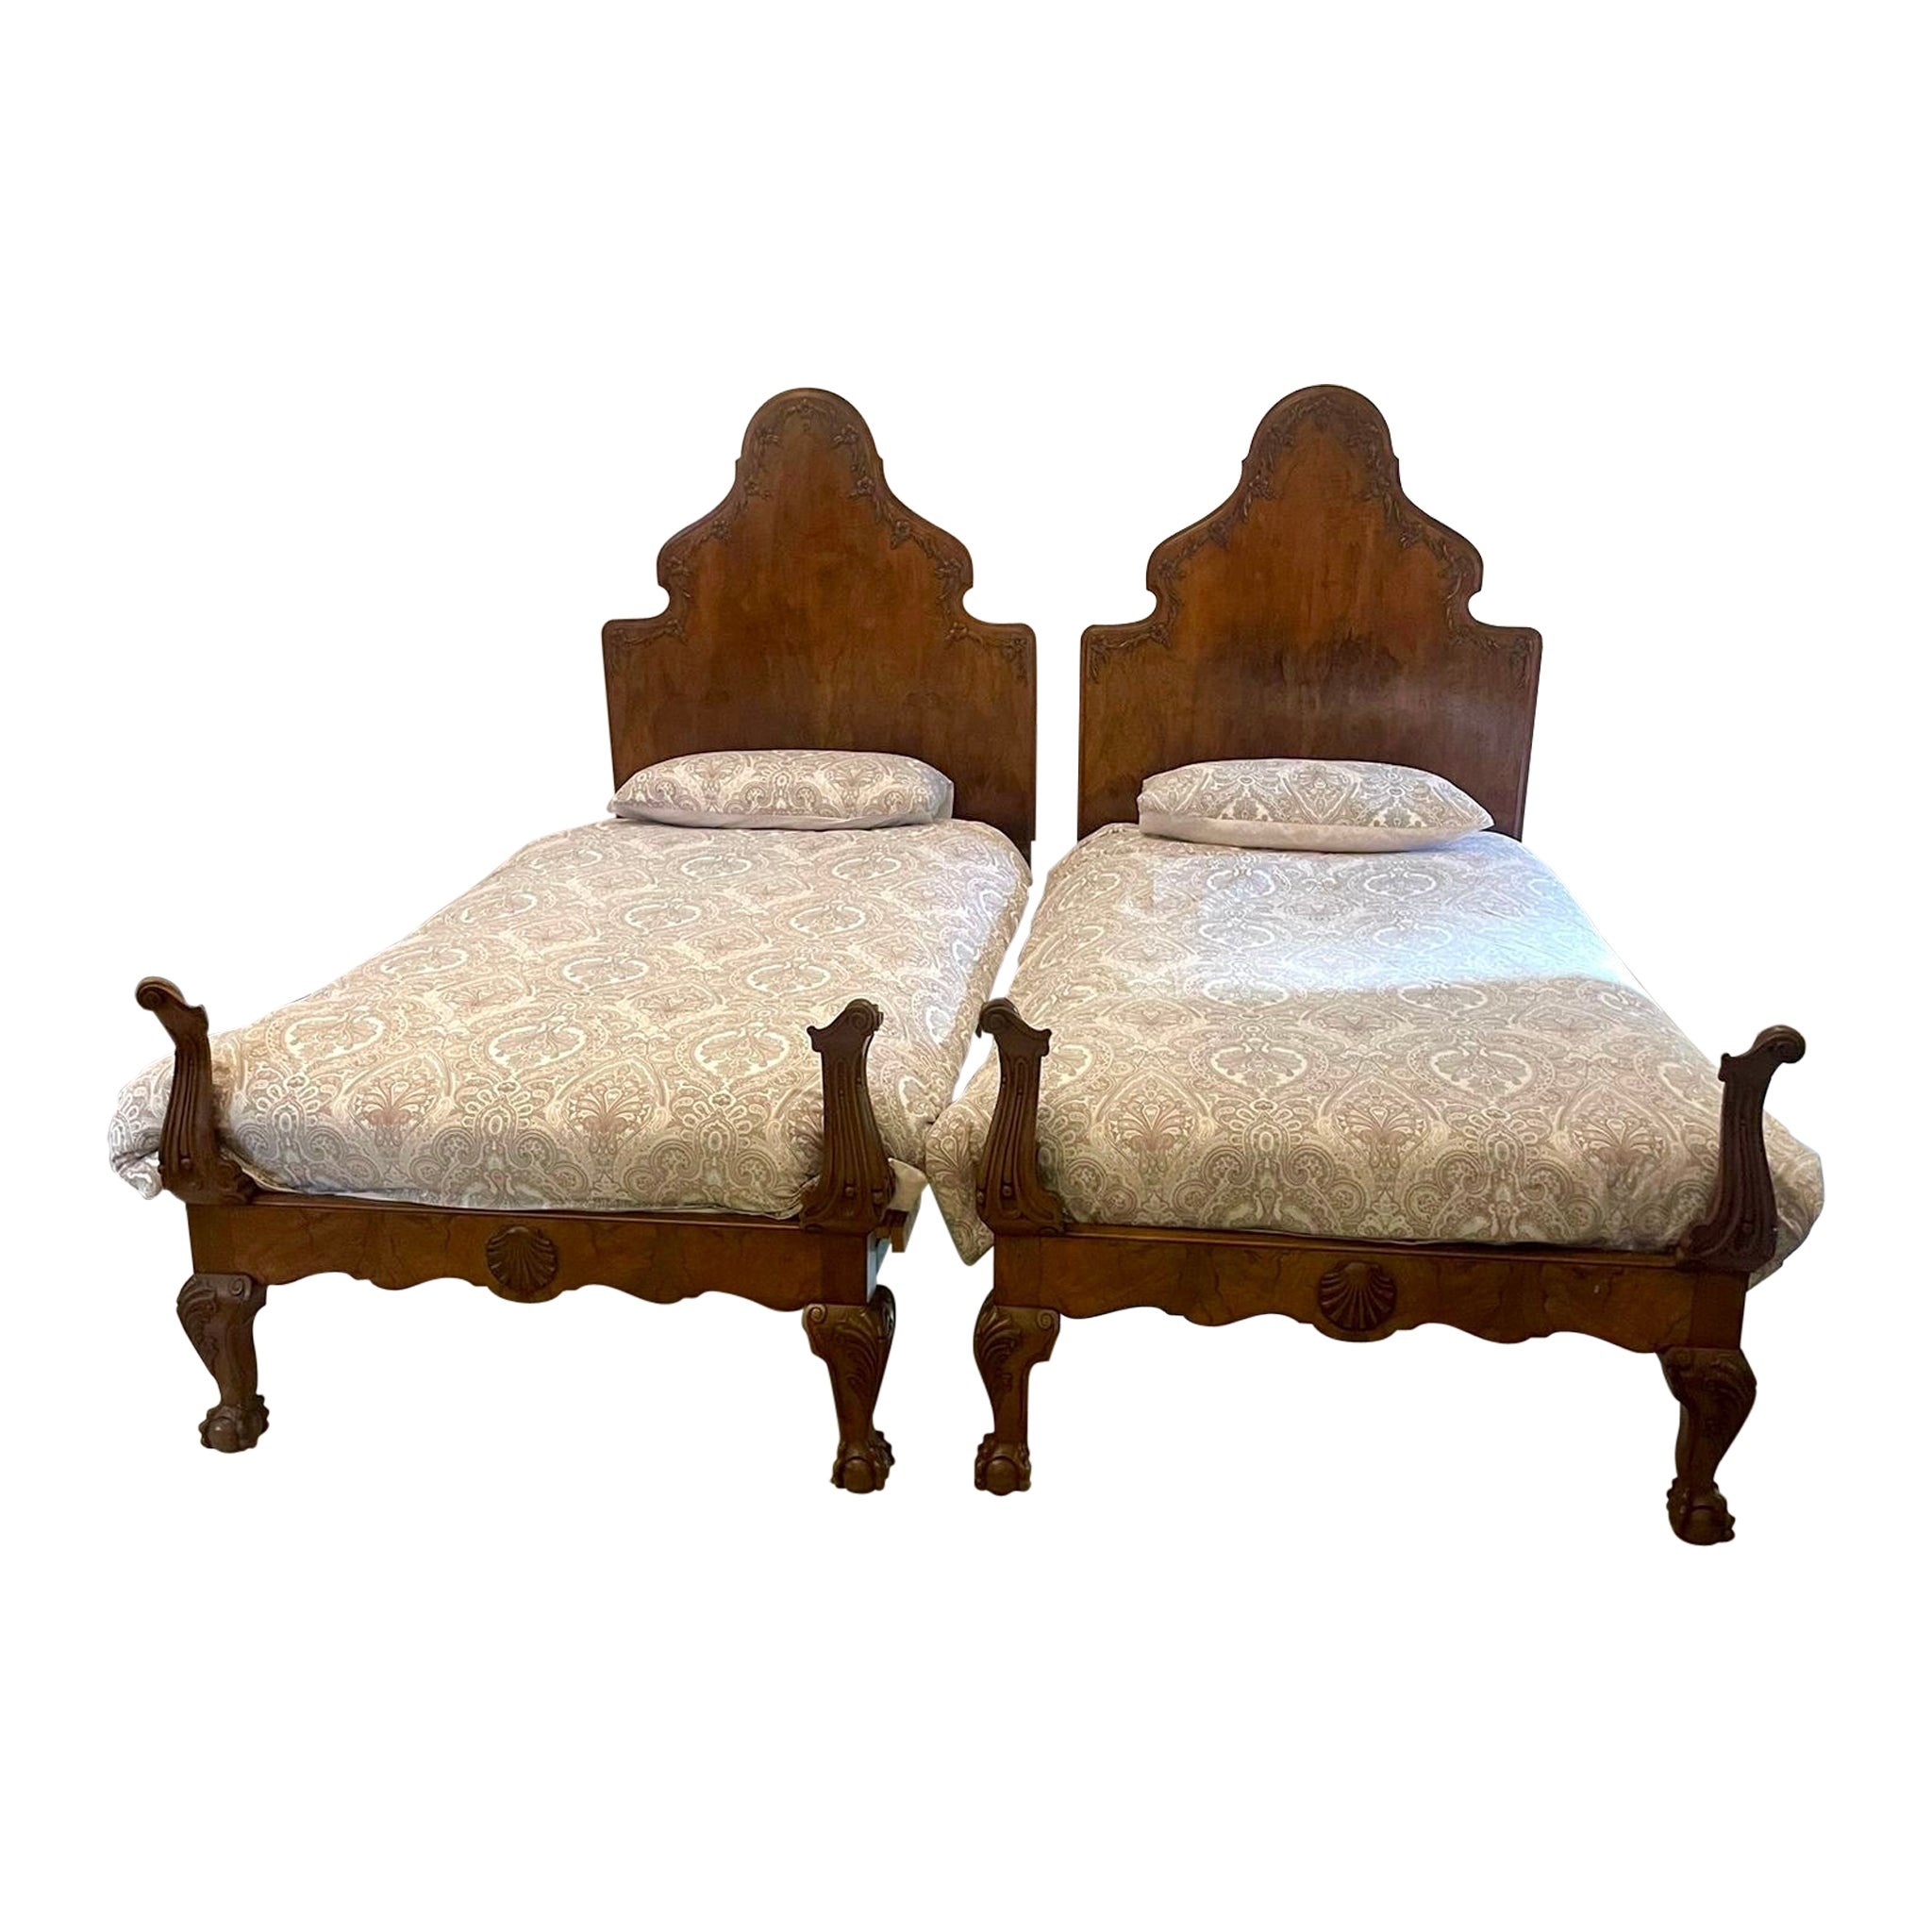 Antique Pair of Quality Carved Burr Walnut Single Beds